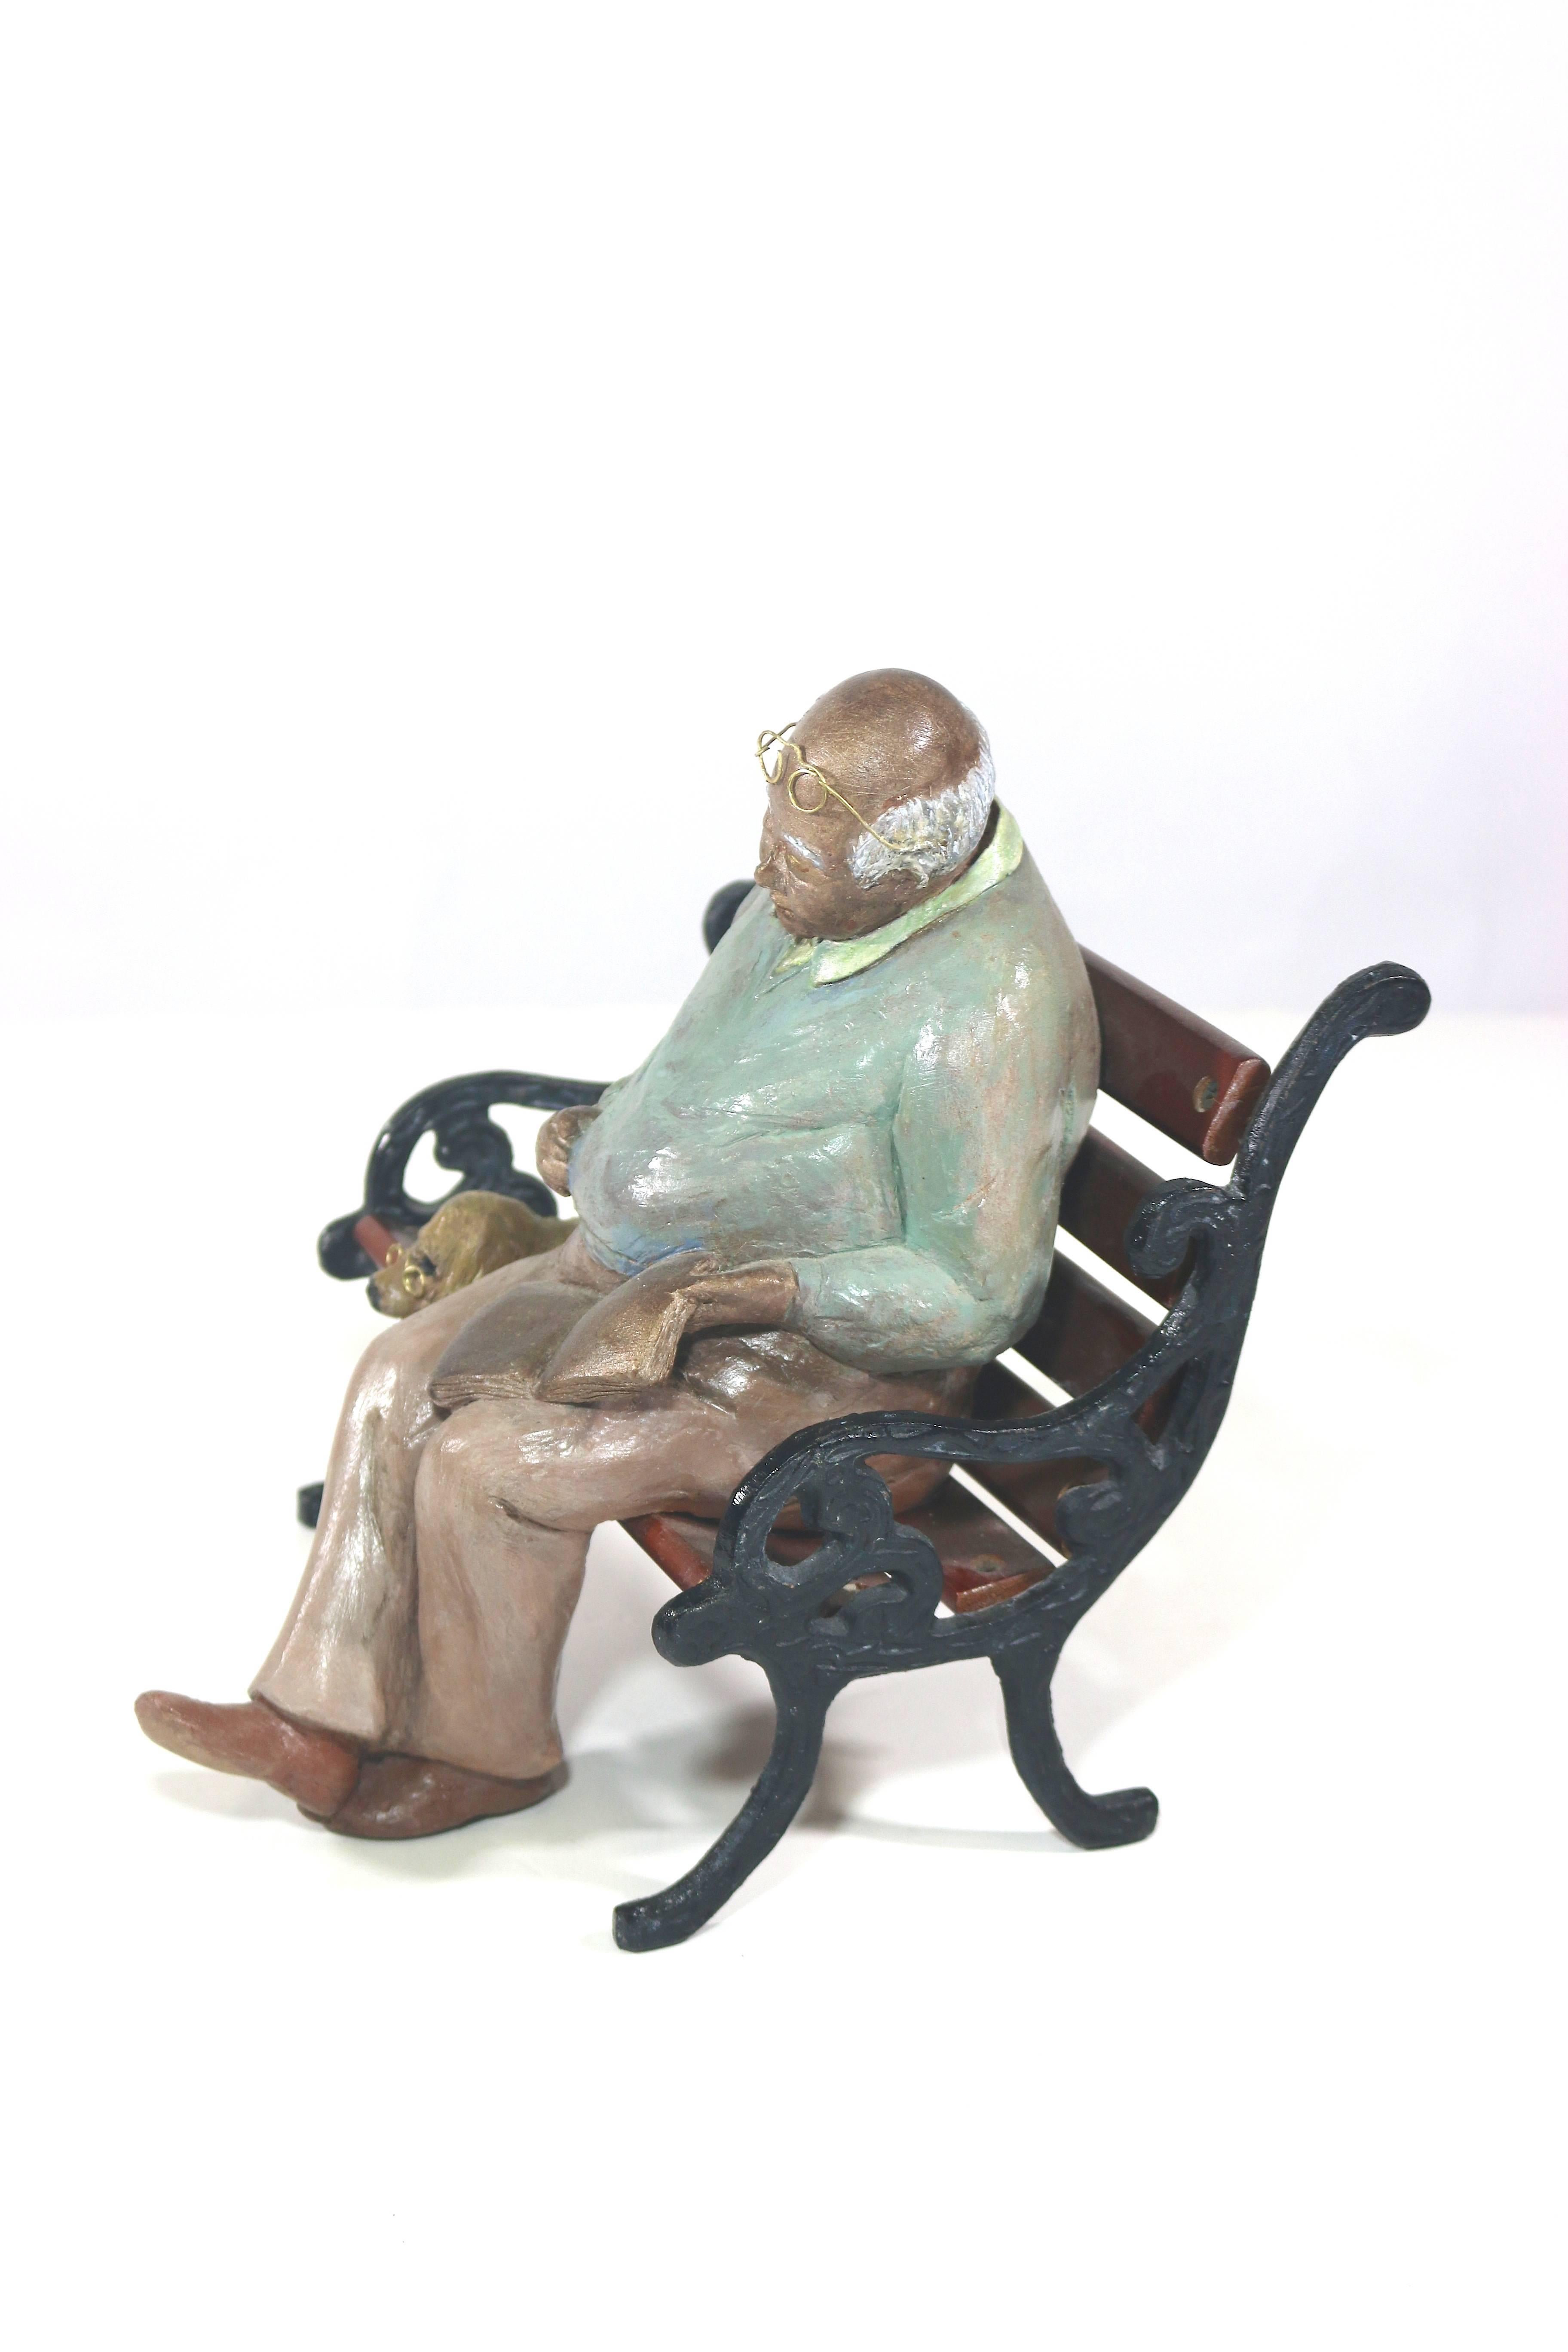 Whimsical Folk Art Mixed Media Sculpture 'Waiting for Godot' 20th Century Artist In Excellent Condition For Sale In West Palm Beach, FL